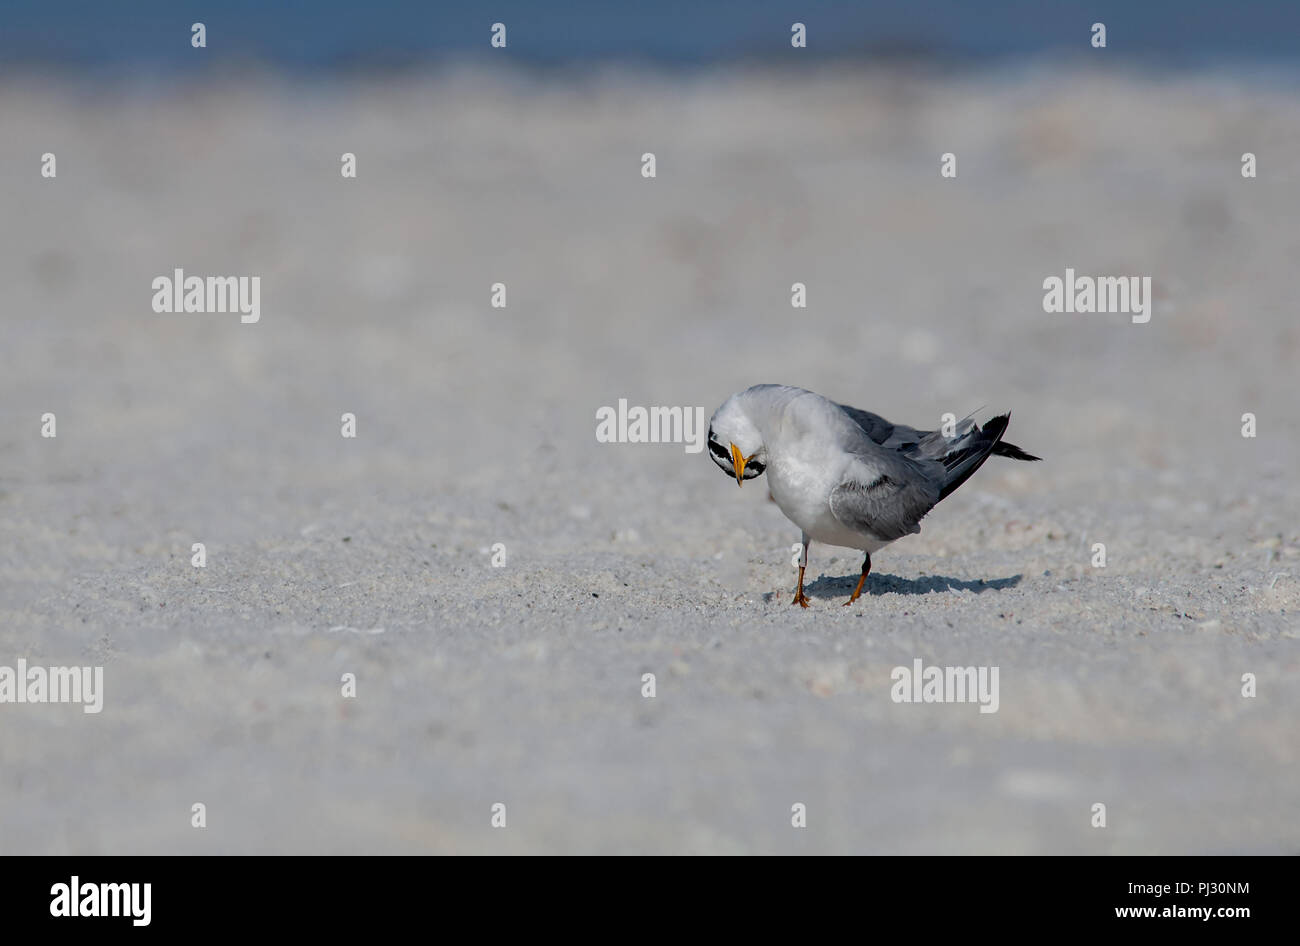 A least tern (Sternula antillarum) in a funny head pose standing on a sandbar along the Gulf of Mexico. Stock Photo